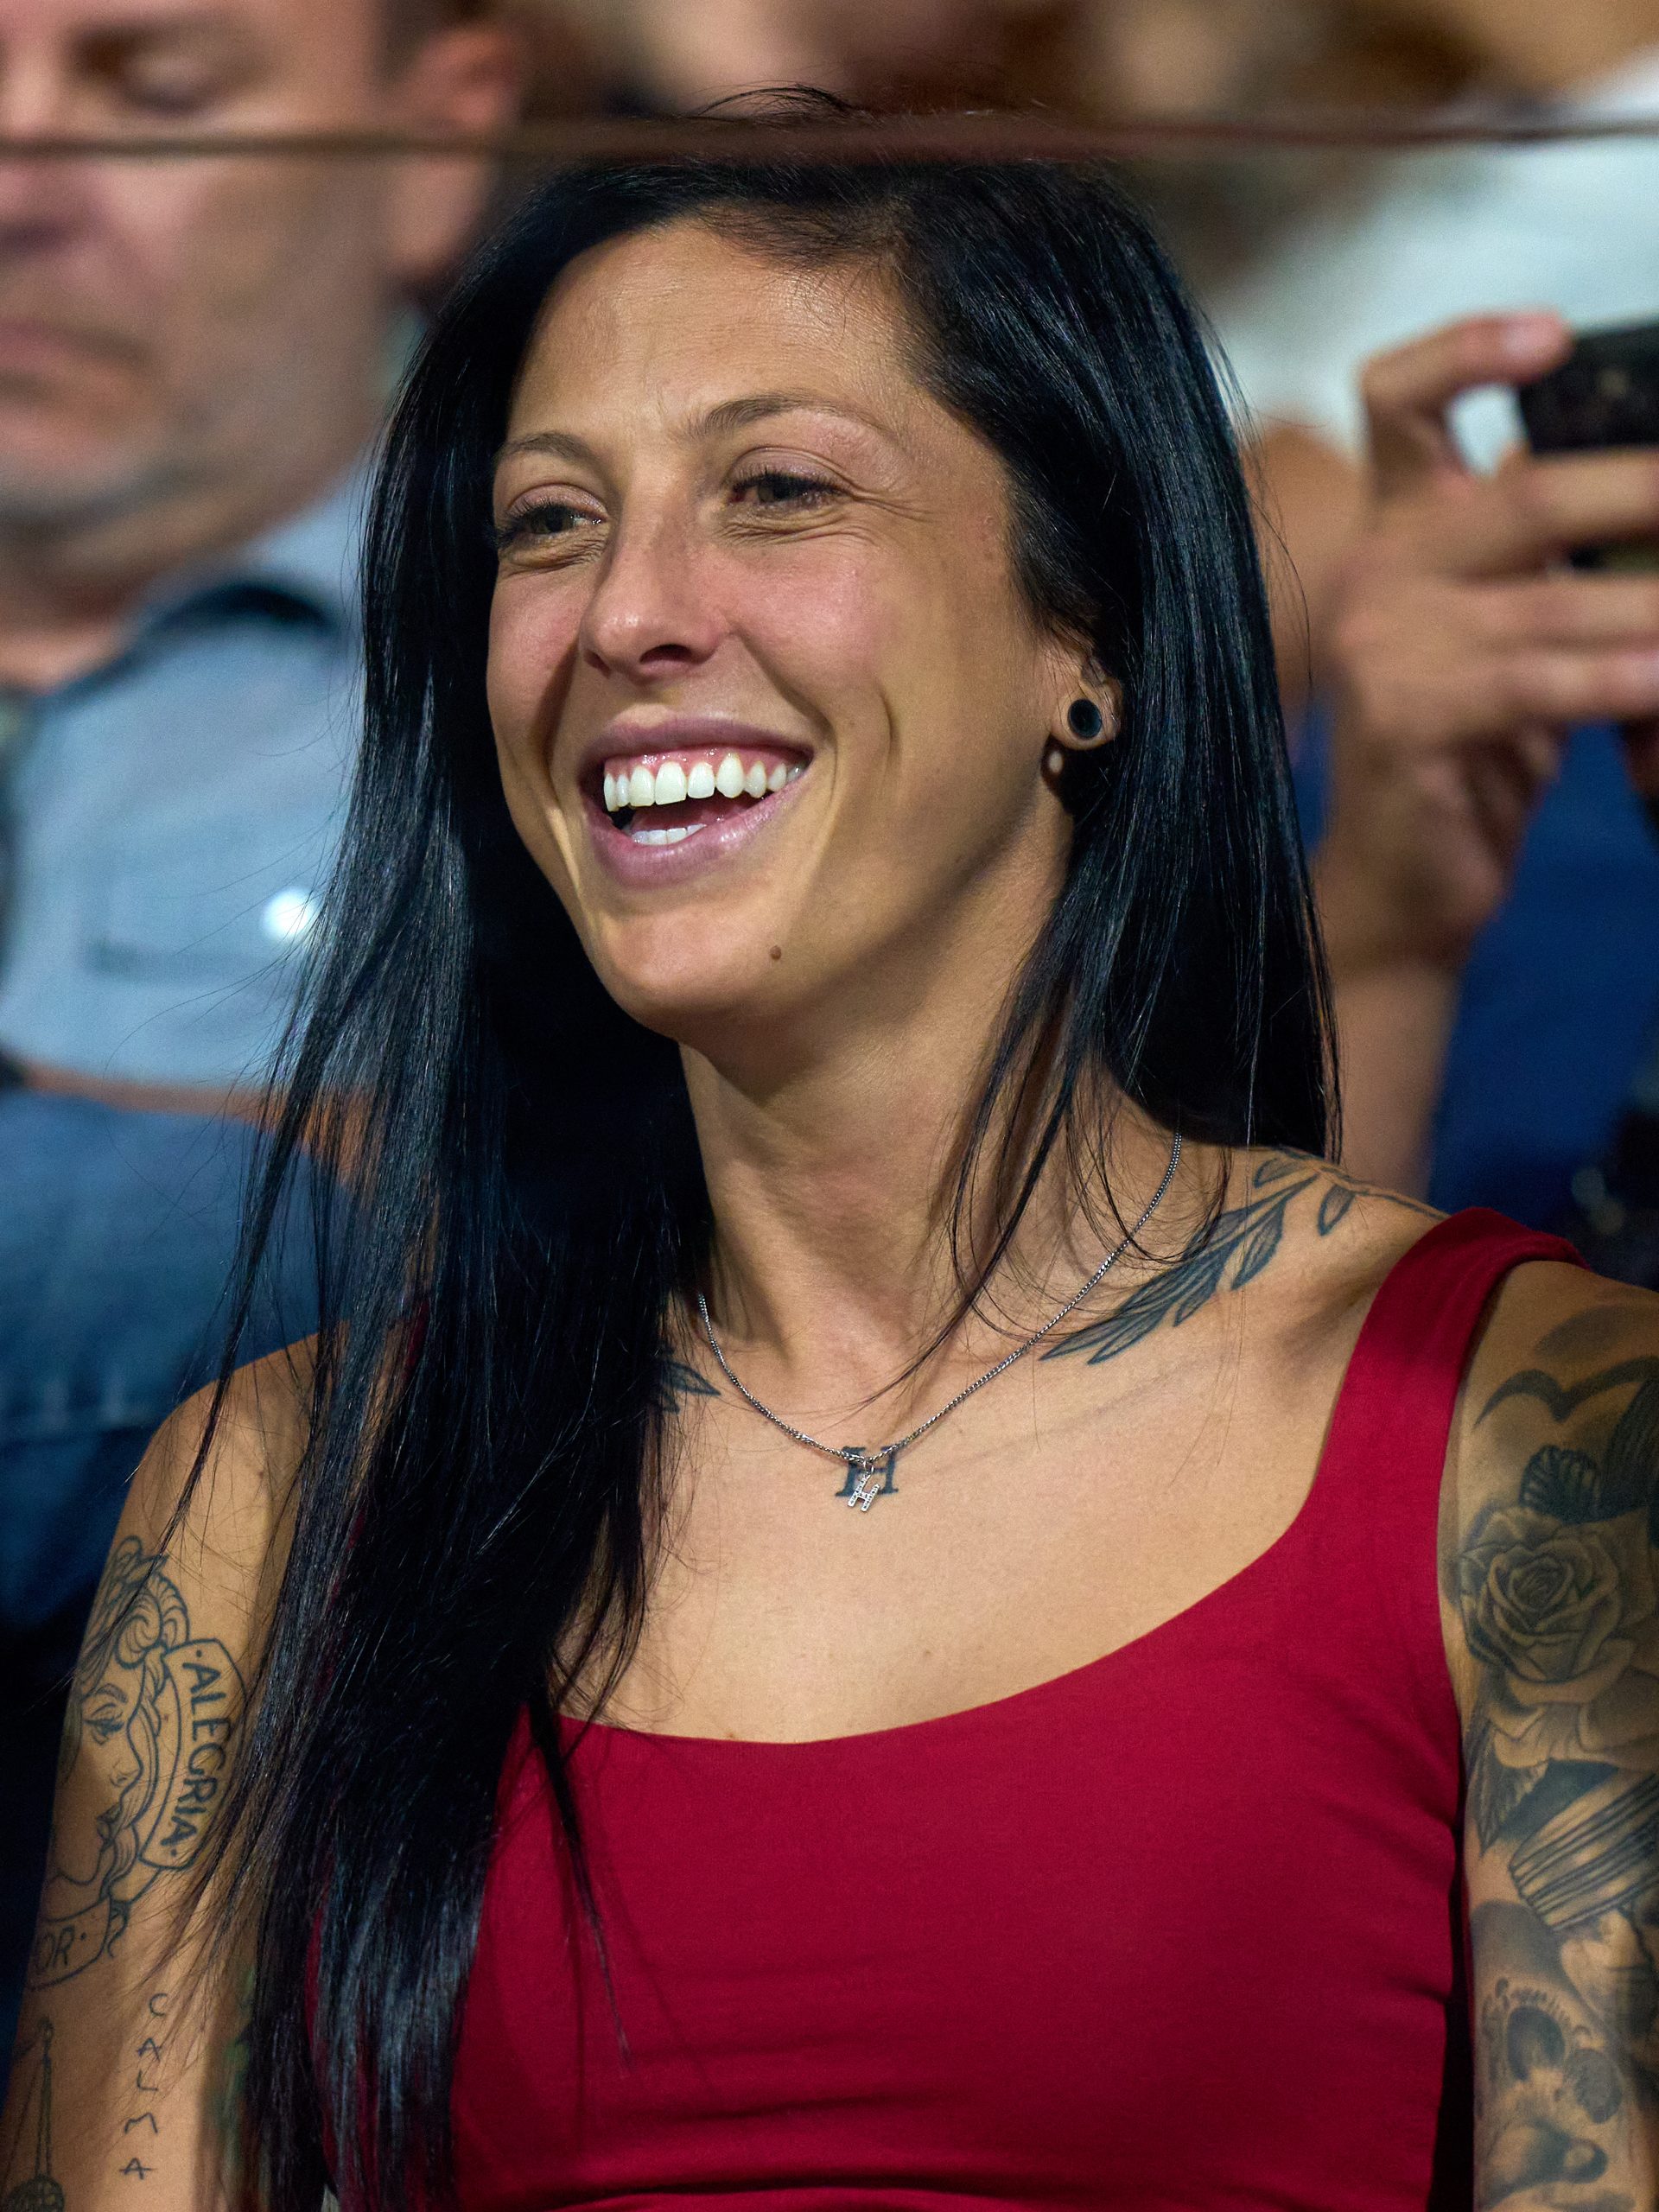 Jenni Hermoso beams from stands at football match as Sevilla stars wear t-shirts to support her amid kissgate scandal